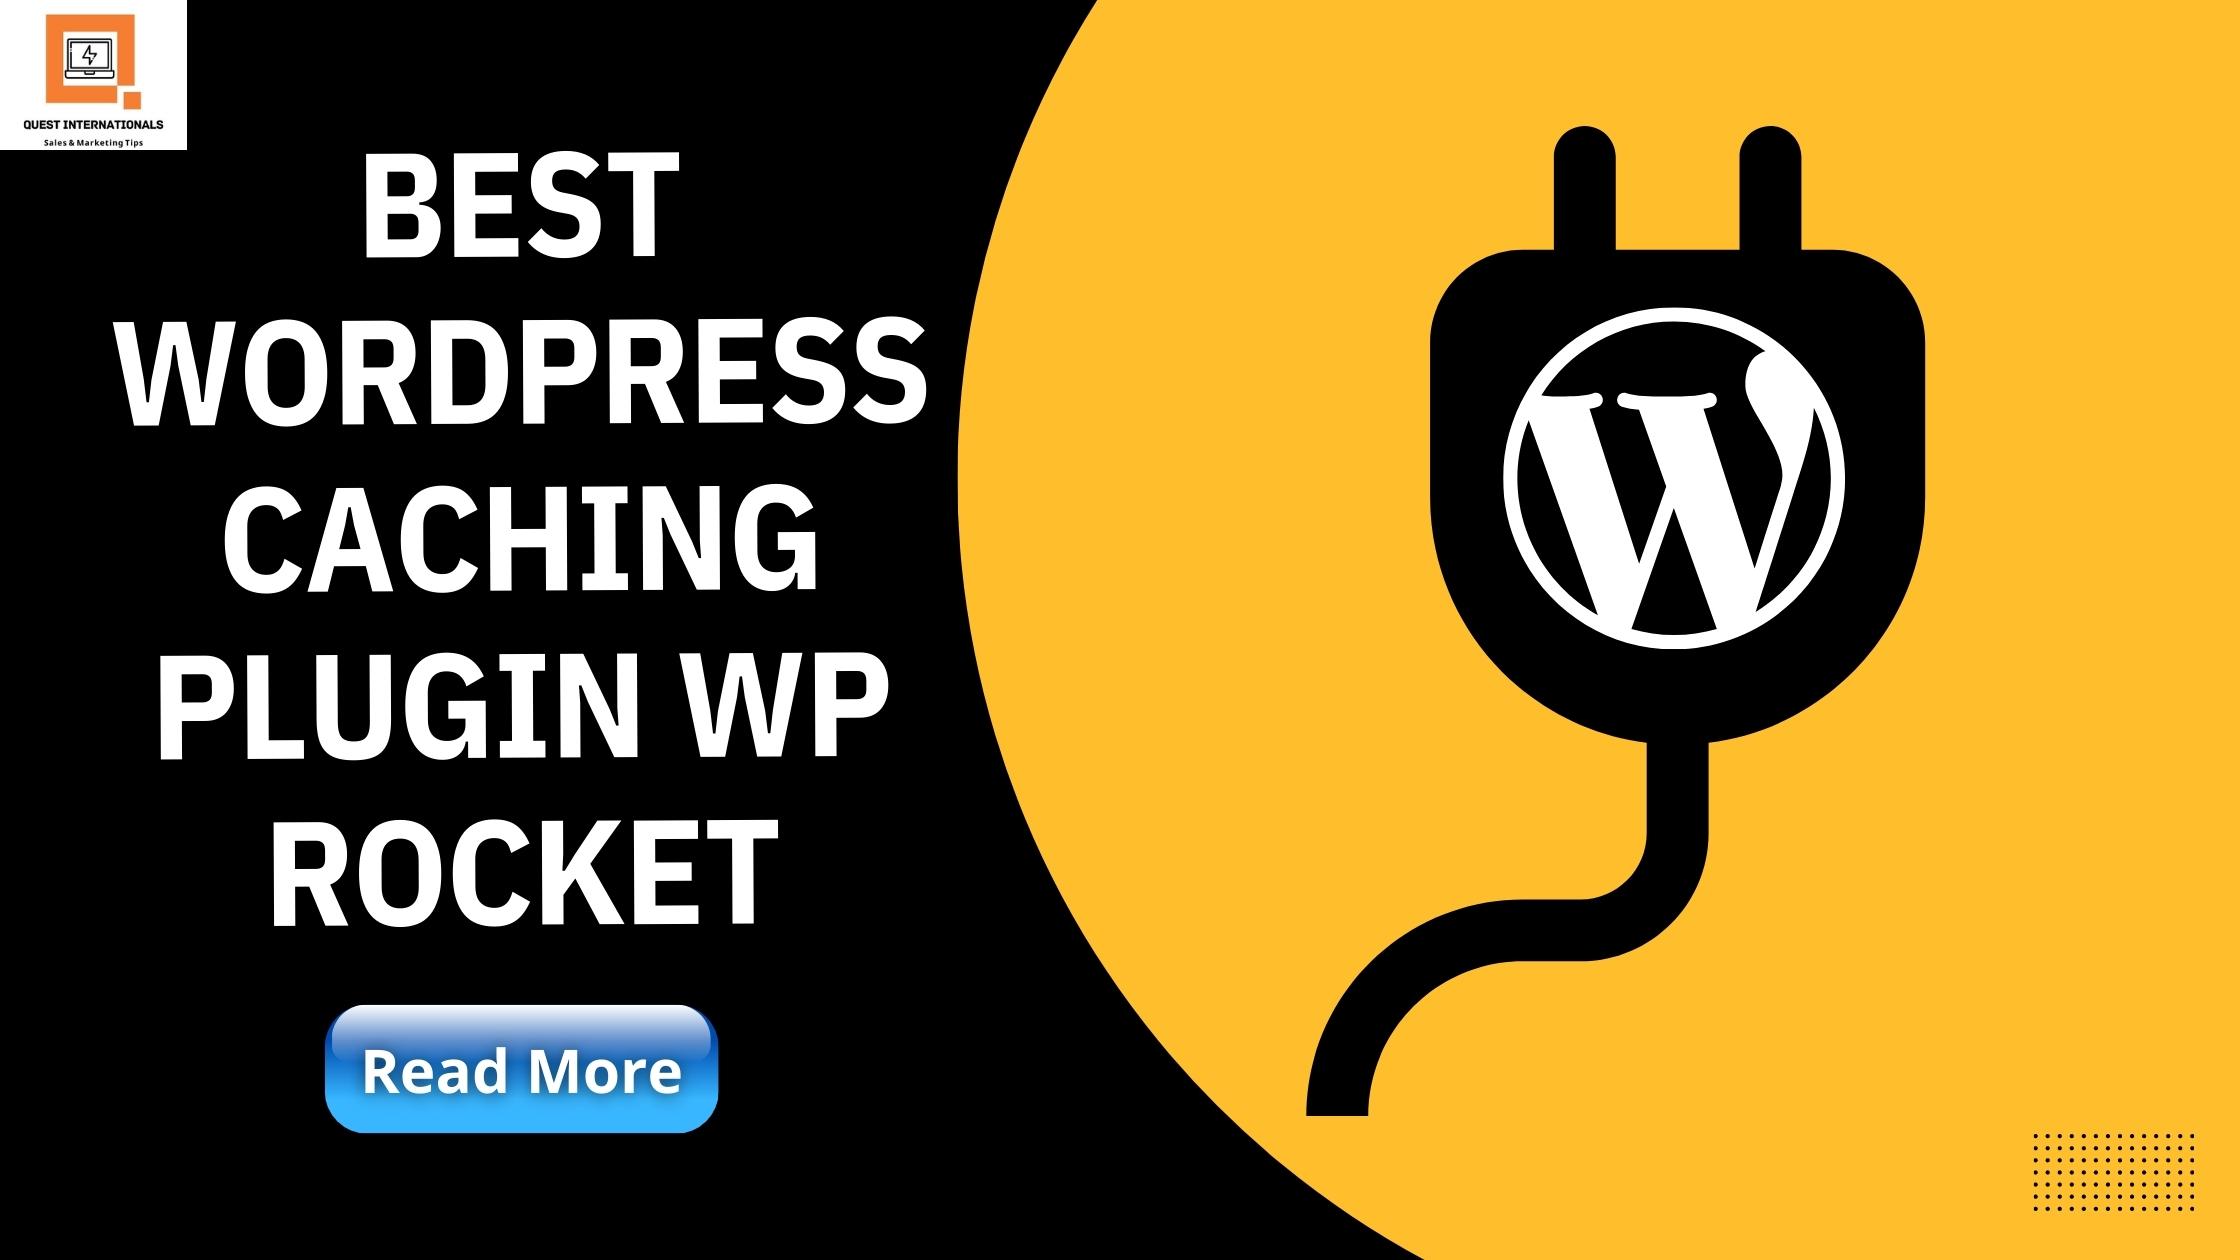 You are currently viewing BEST WORDPRESS CACHING PLUGIN WP ROCKET PLUGIN